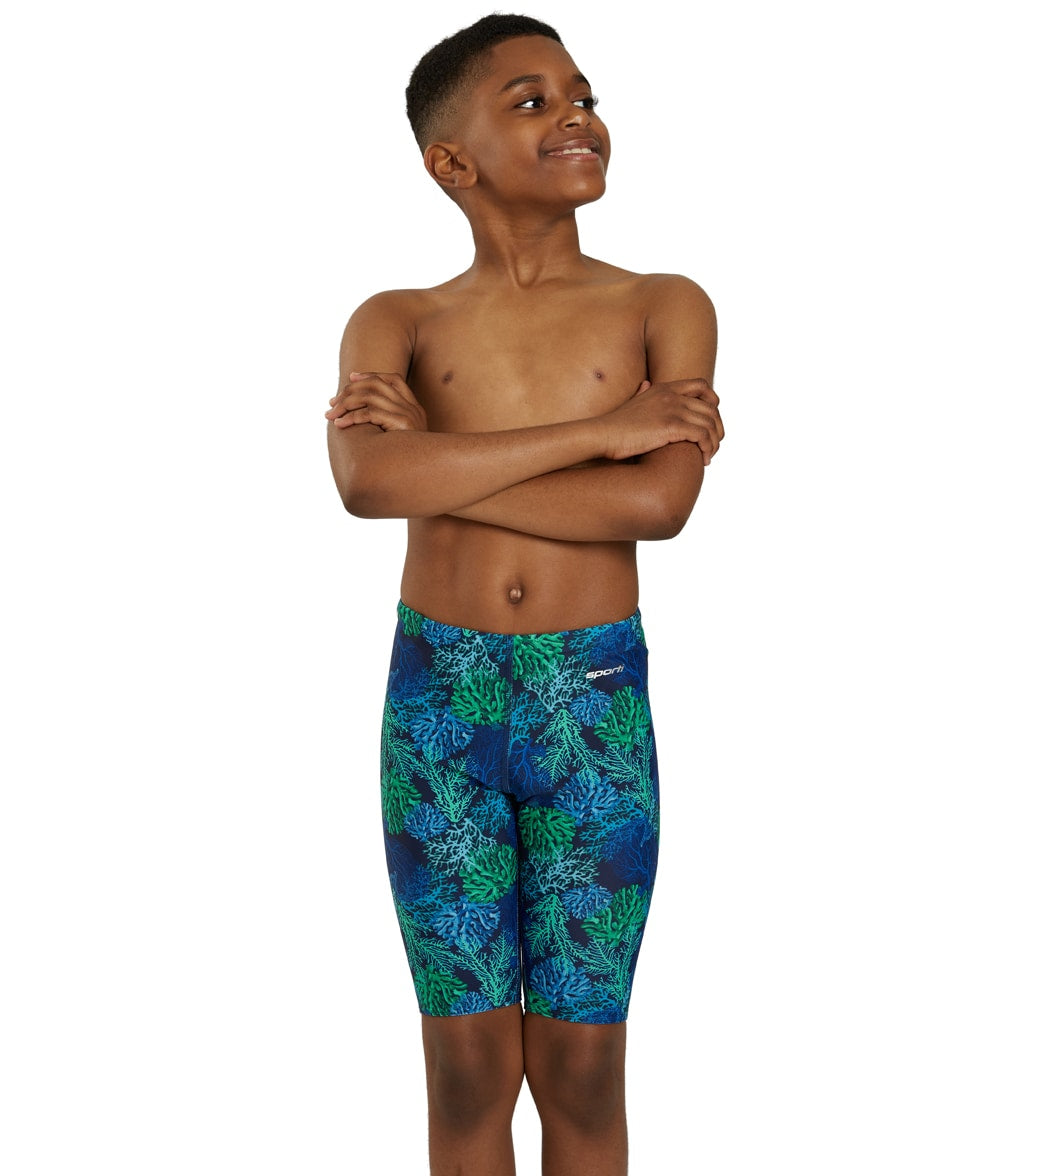 Sporti Coral Reef Jammer Swimsuit Youth (22 - 28)